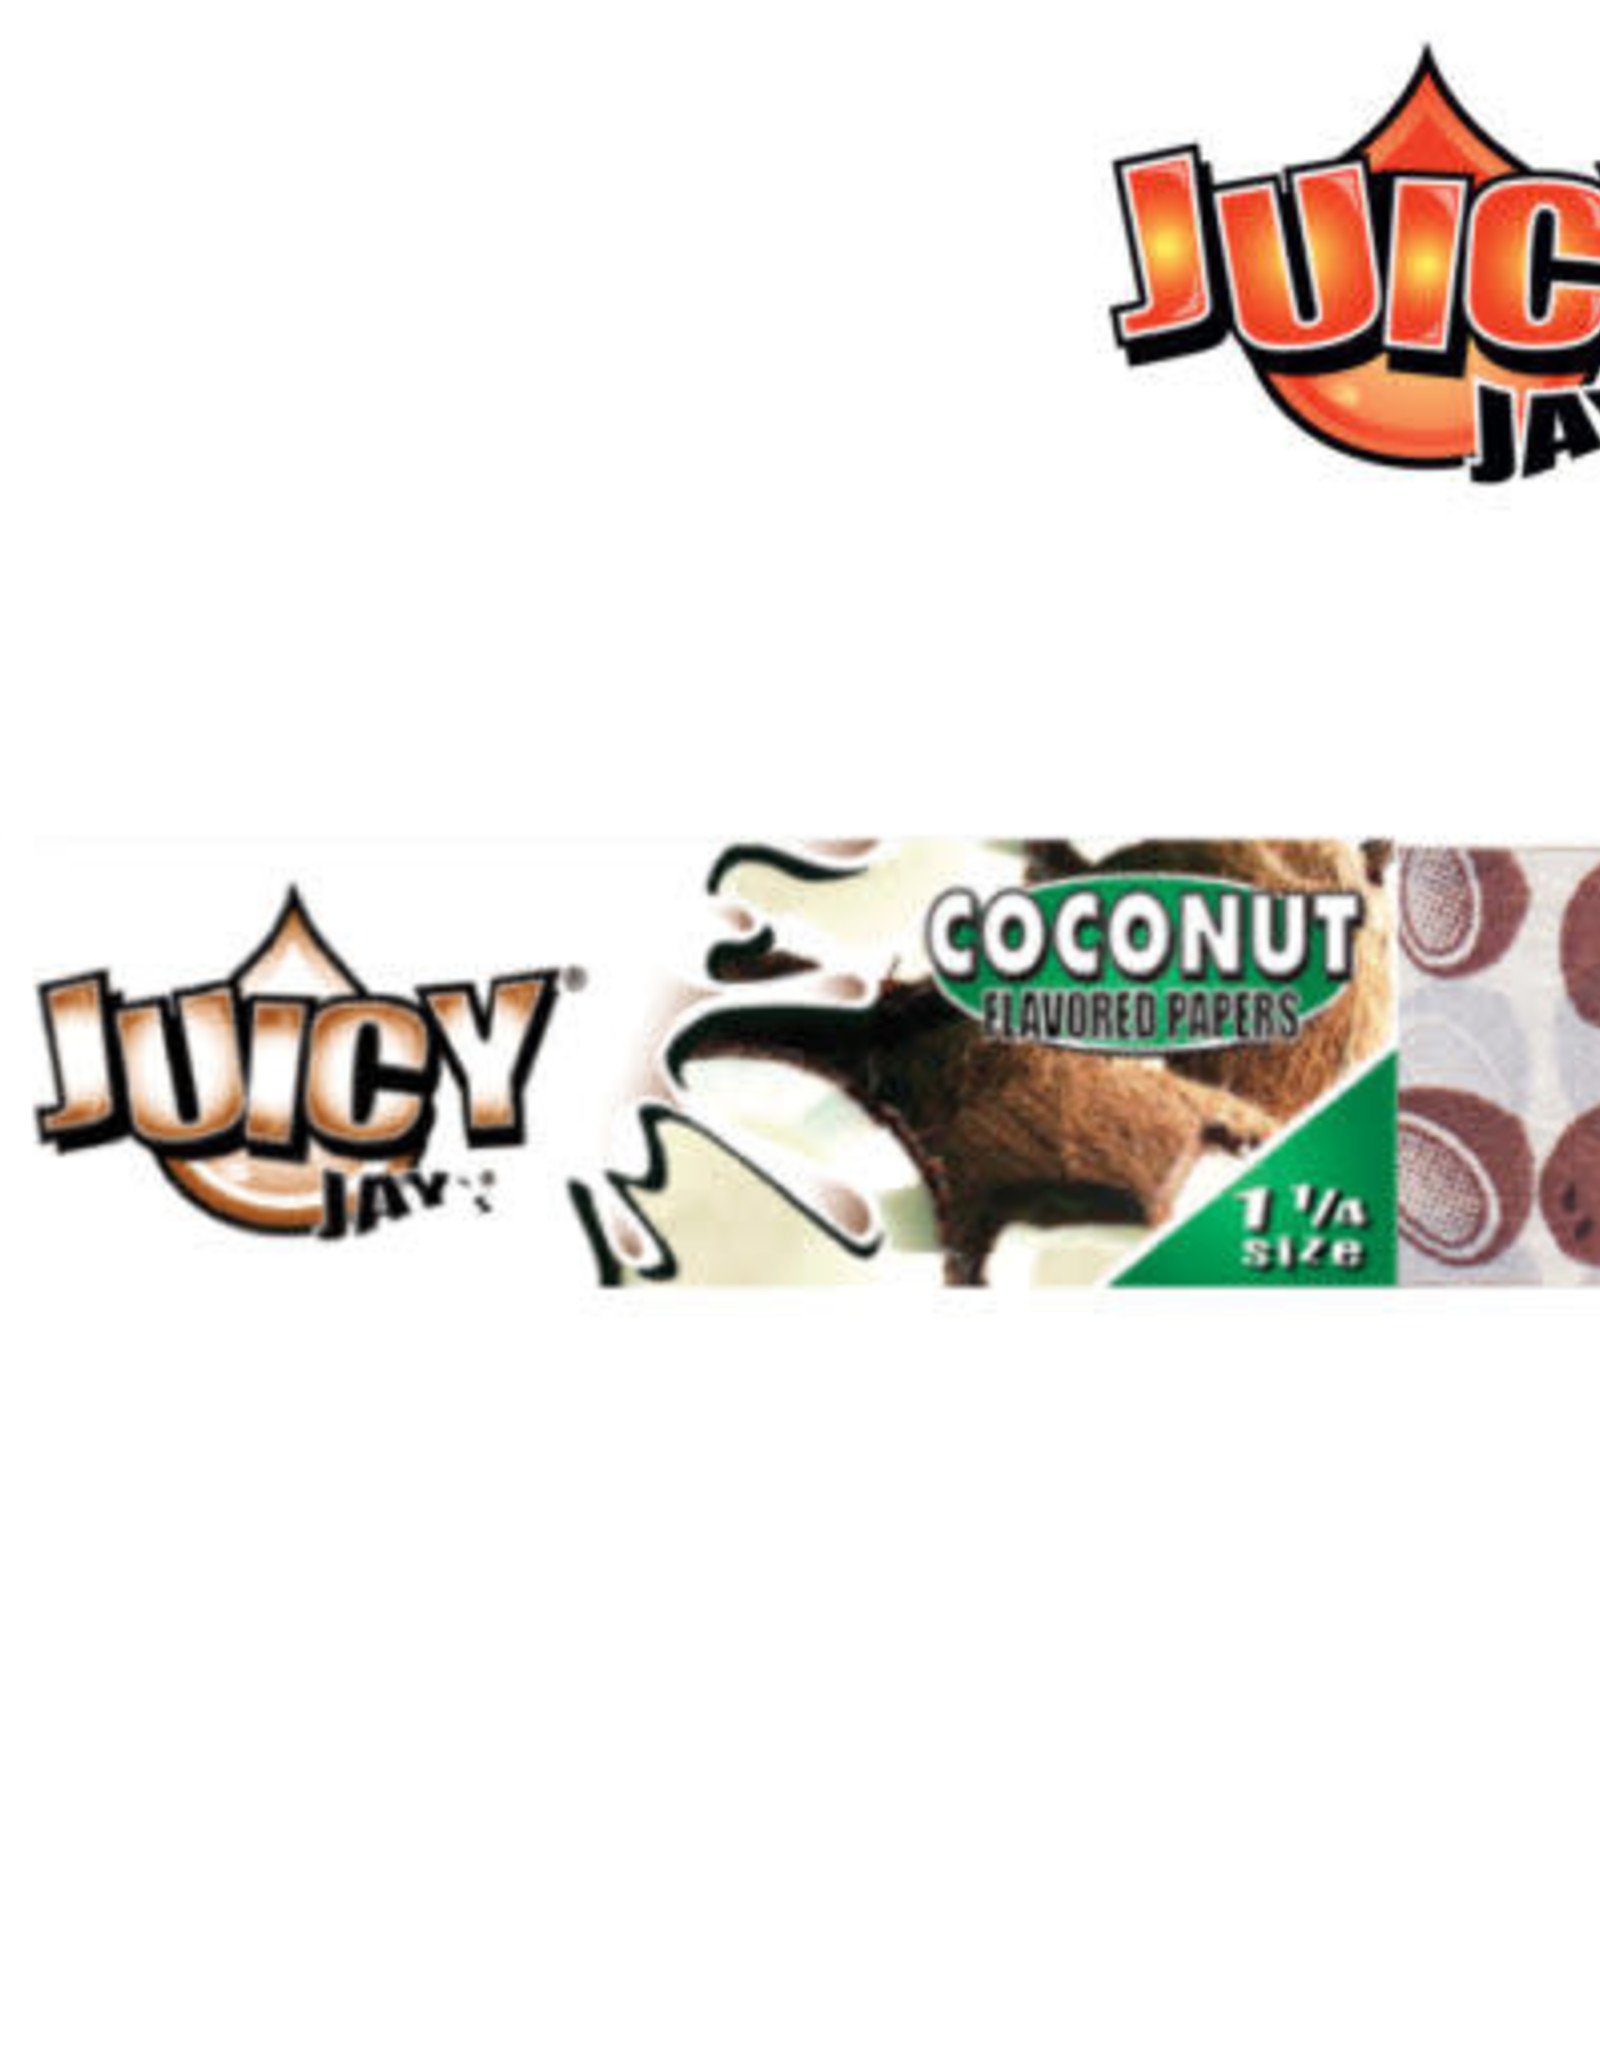 Juicy Jays's JUICY JAY'S ROLLING PAPERS 32PK 1 1/4 Size COCONUT